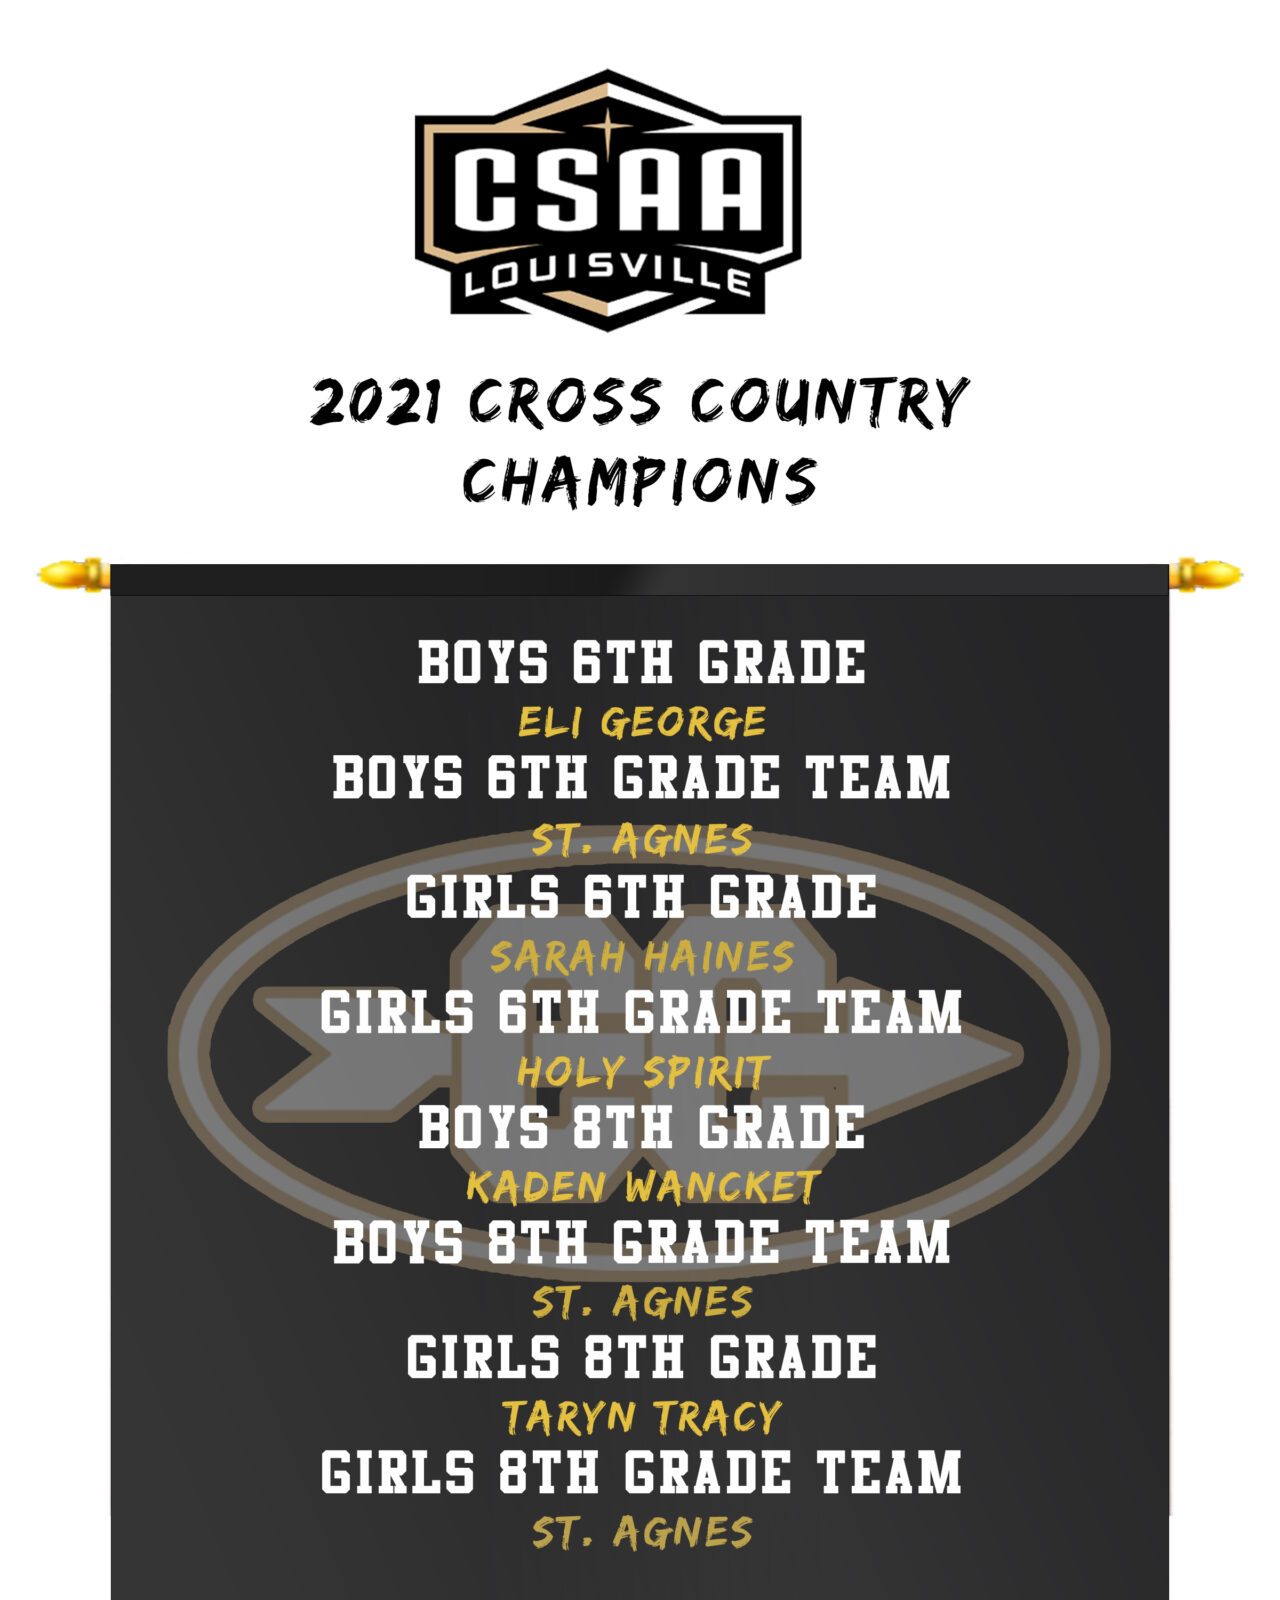 2021 Cross Country Champions